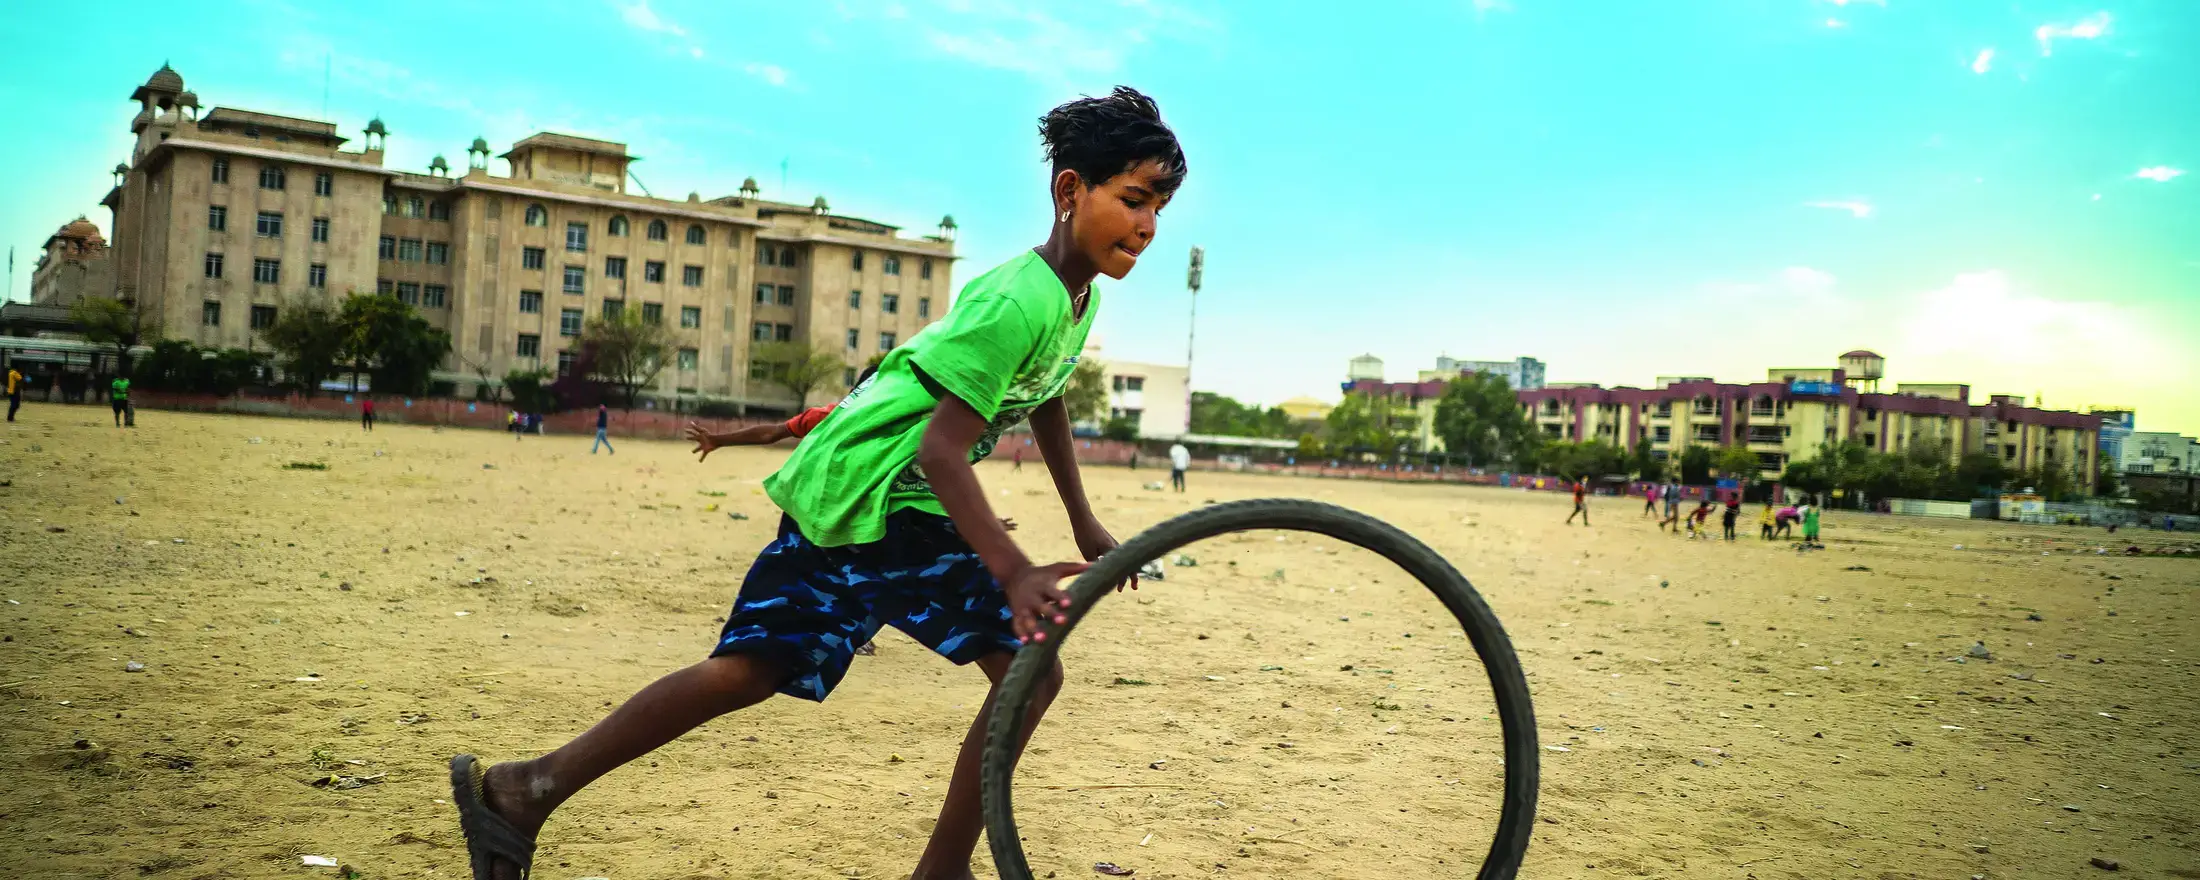 A girl play with a bycicle wheel